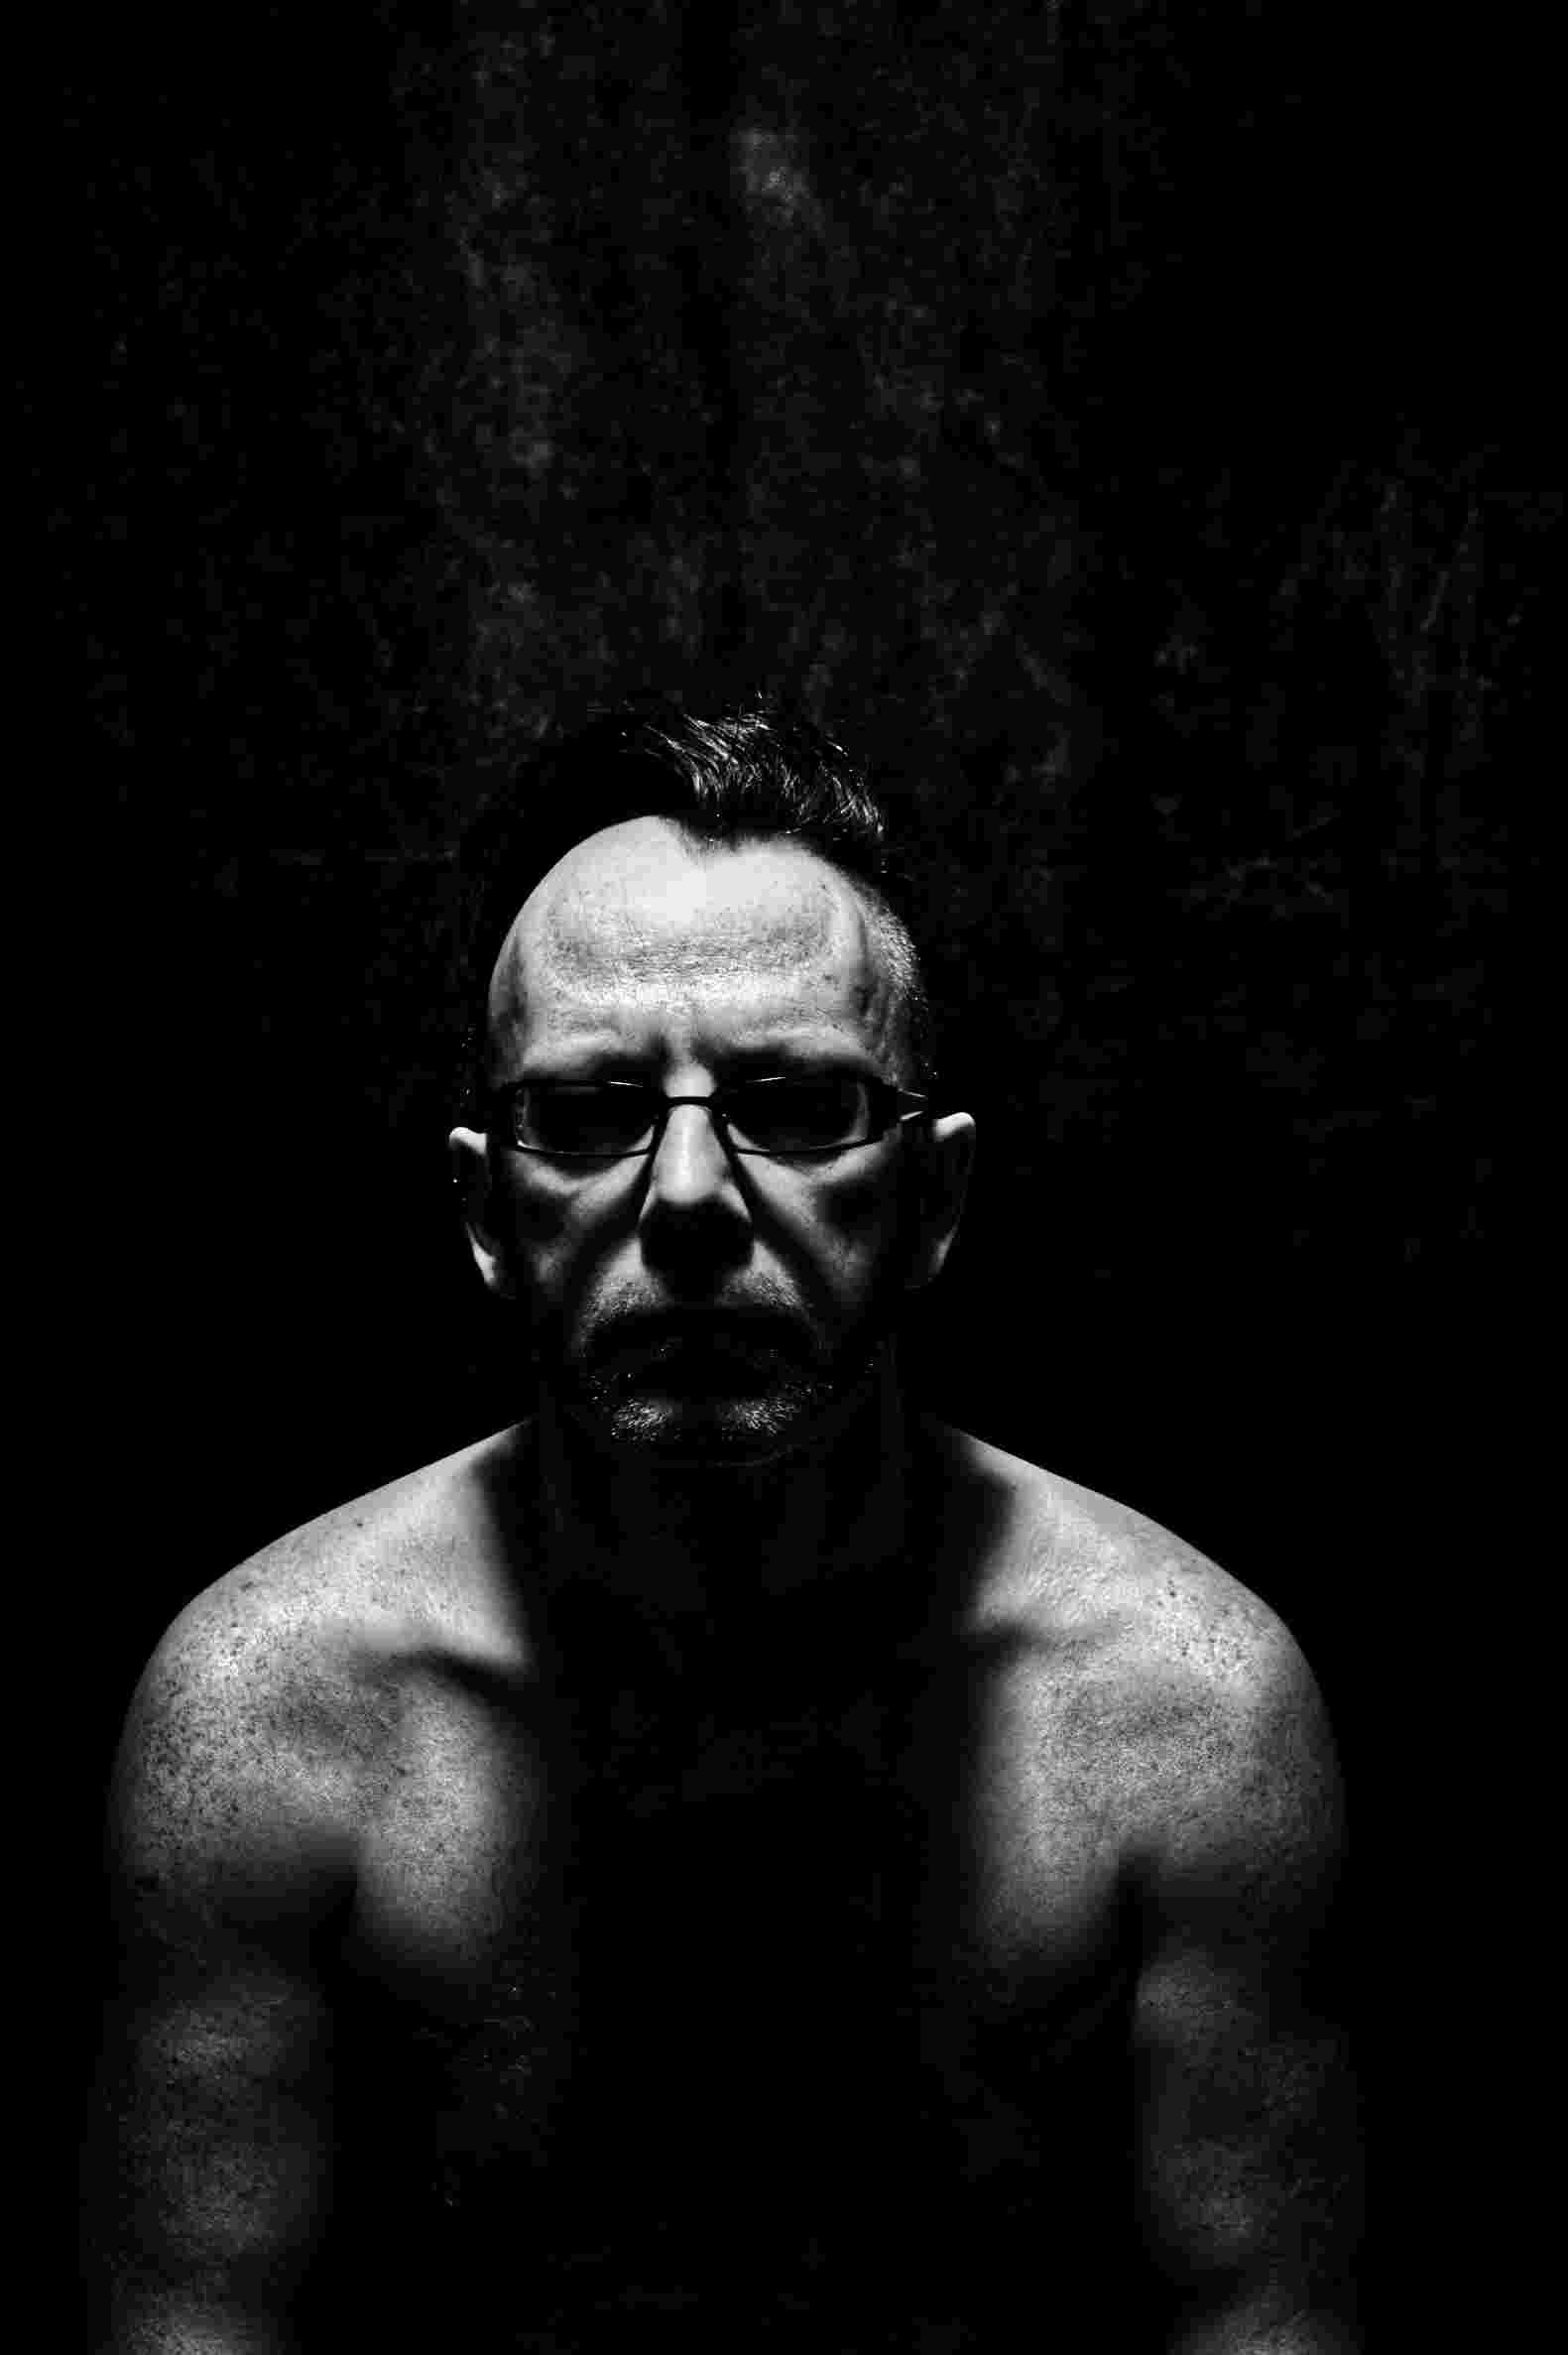 High contrast portrait of shirtless male agains black background